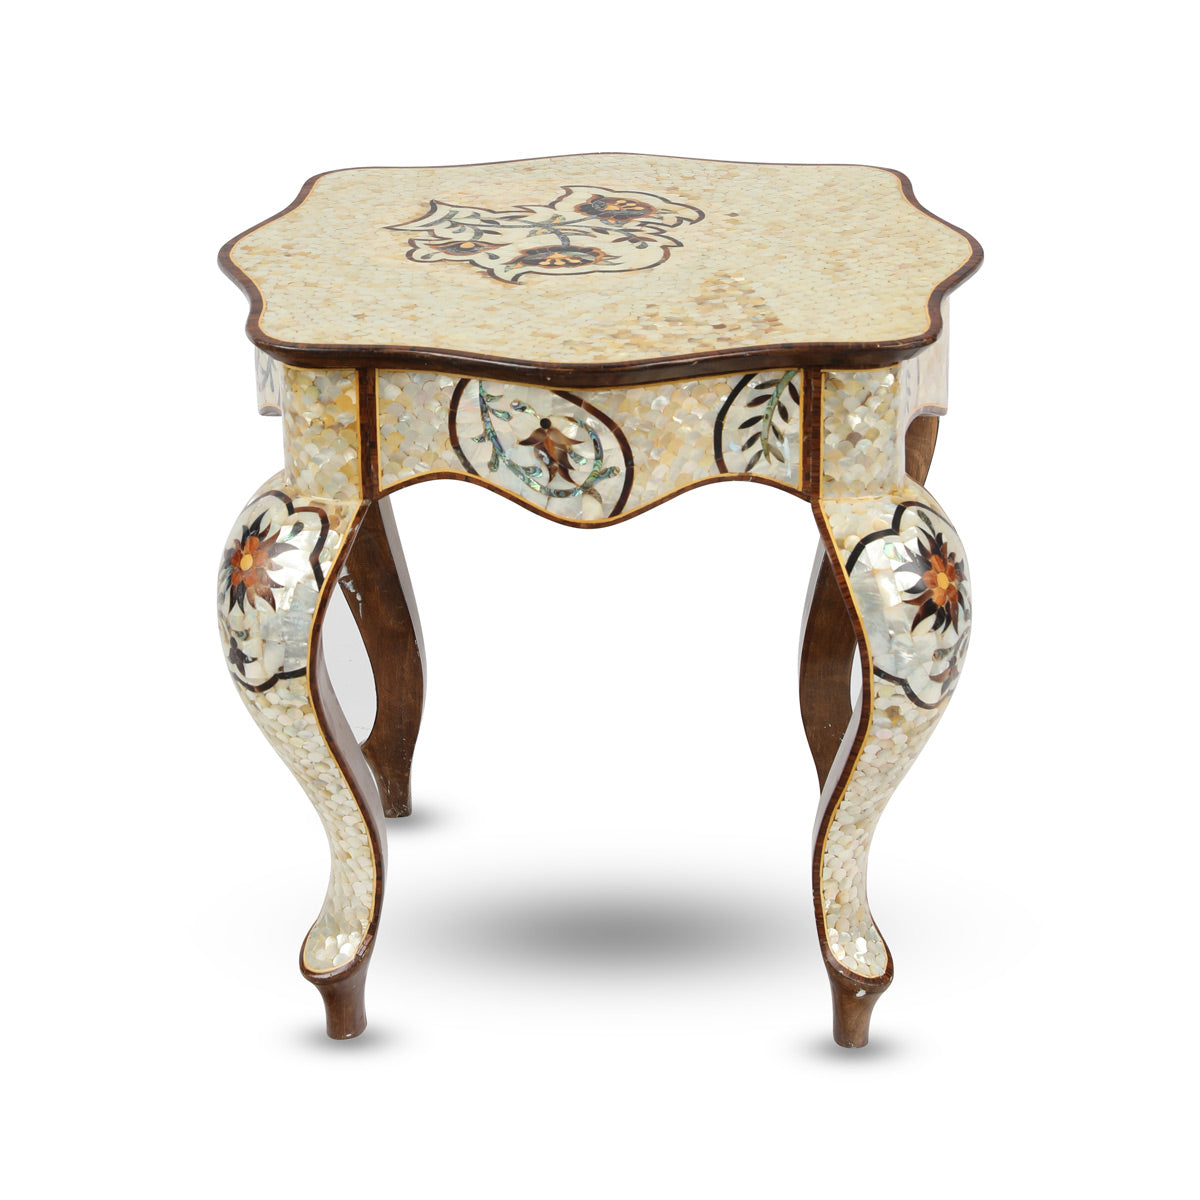 Side View of Hand-Crafted Artistic Arabian Coffee Table